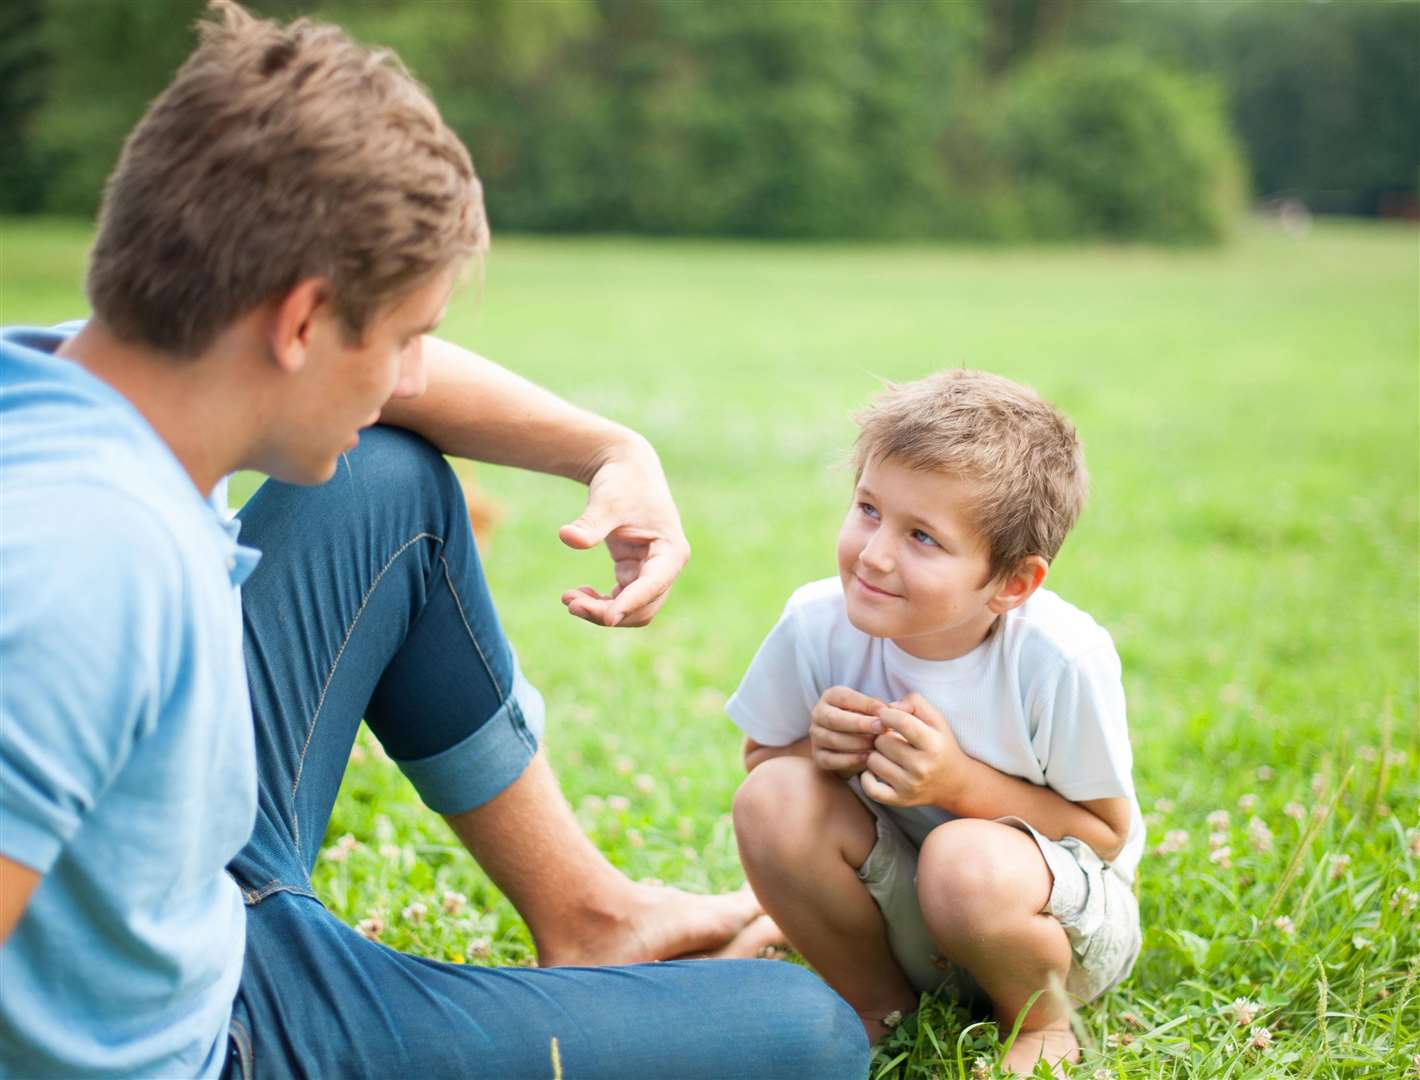 'Listening to your child makes them more likely to listen to you'